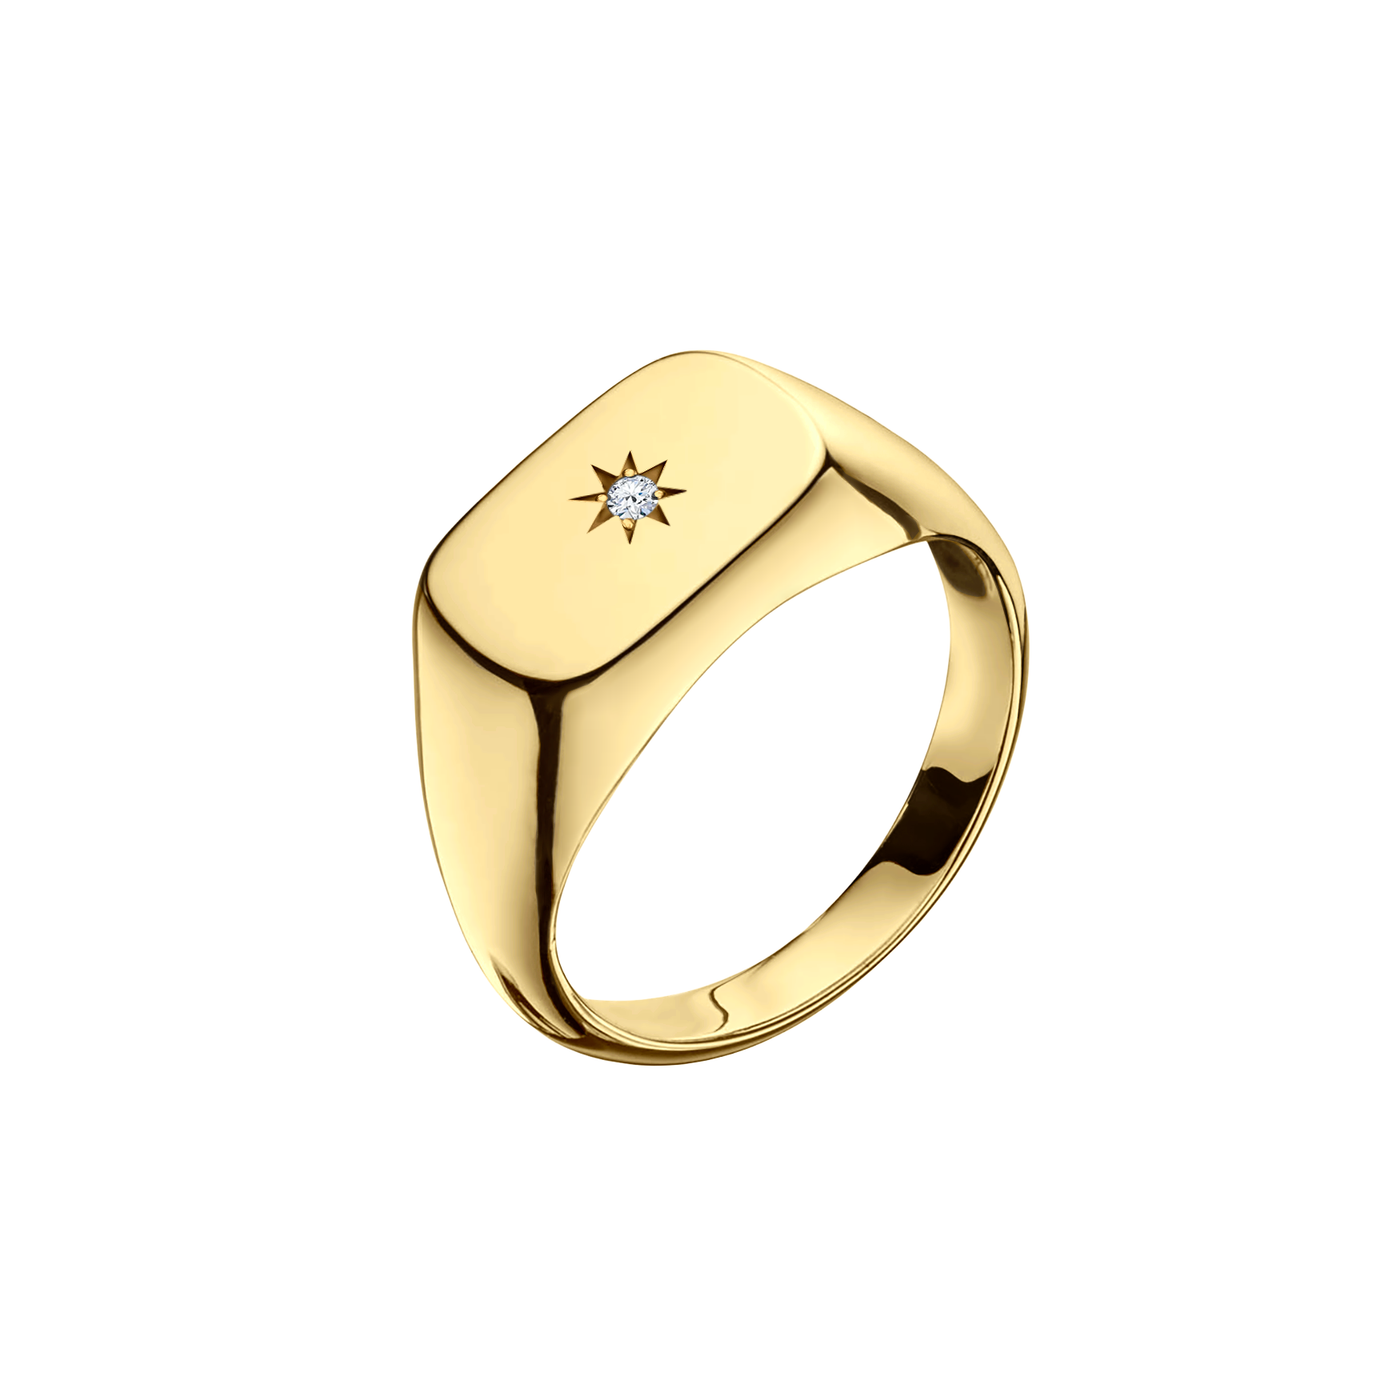 Anel Masculino em Ouro 18K - On the Top